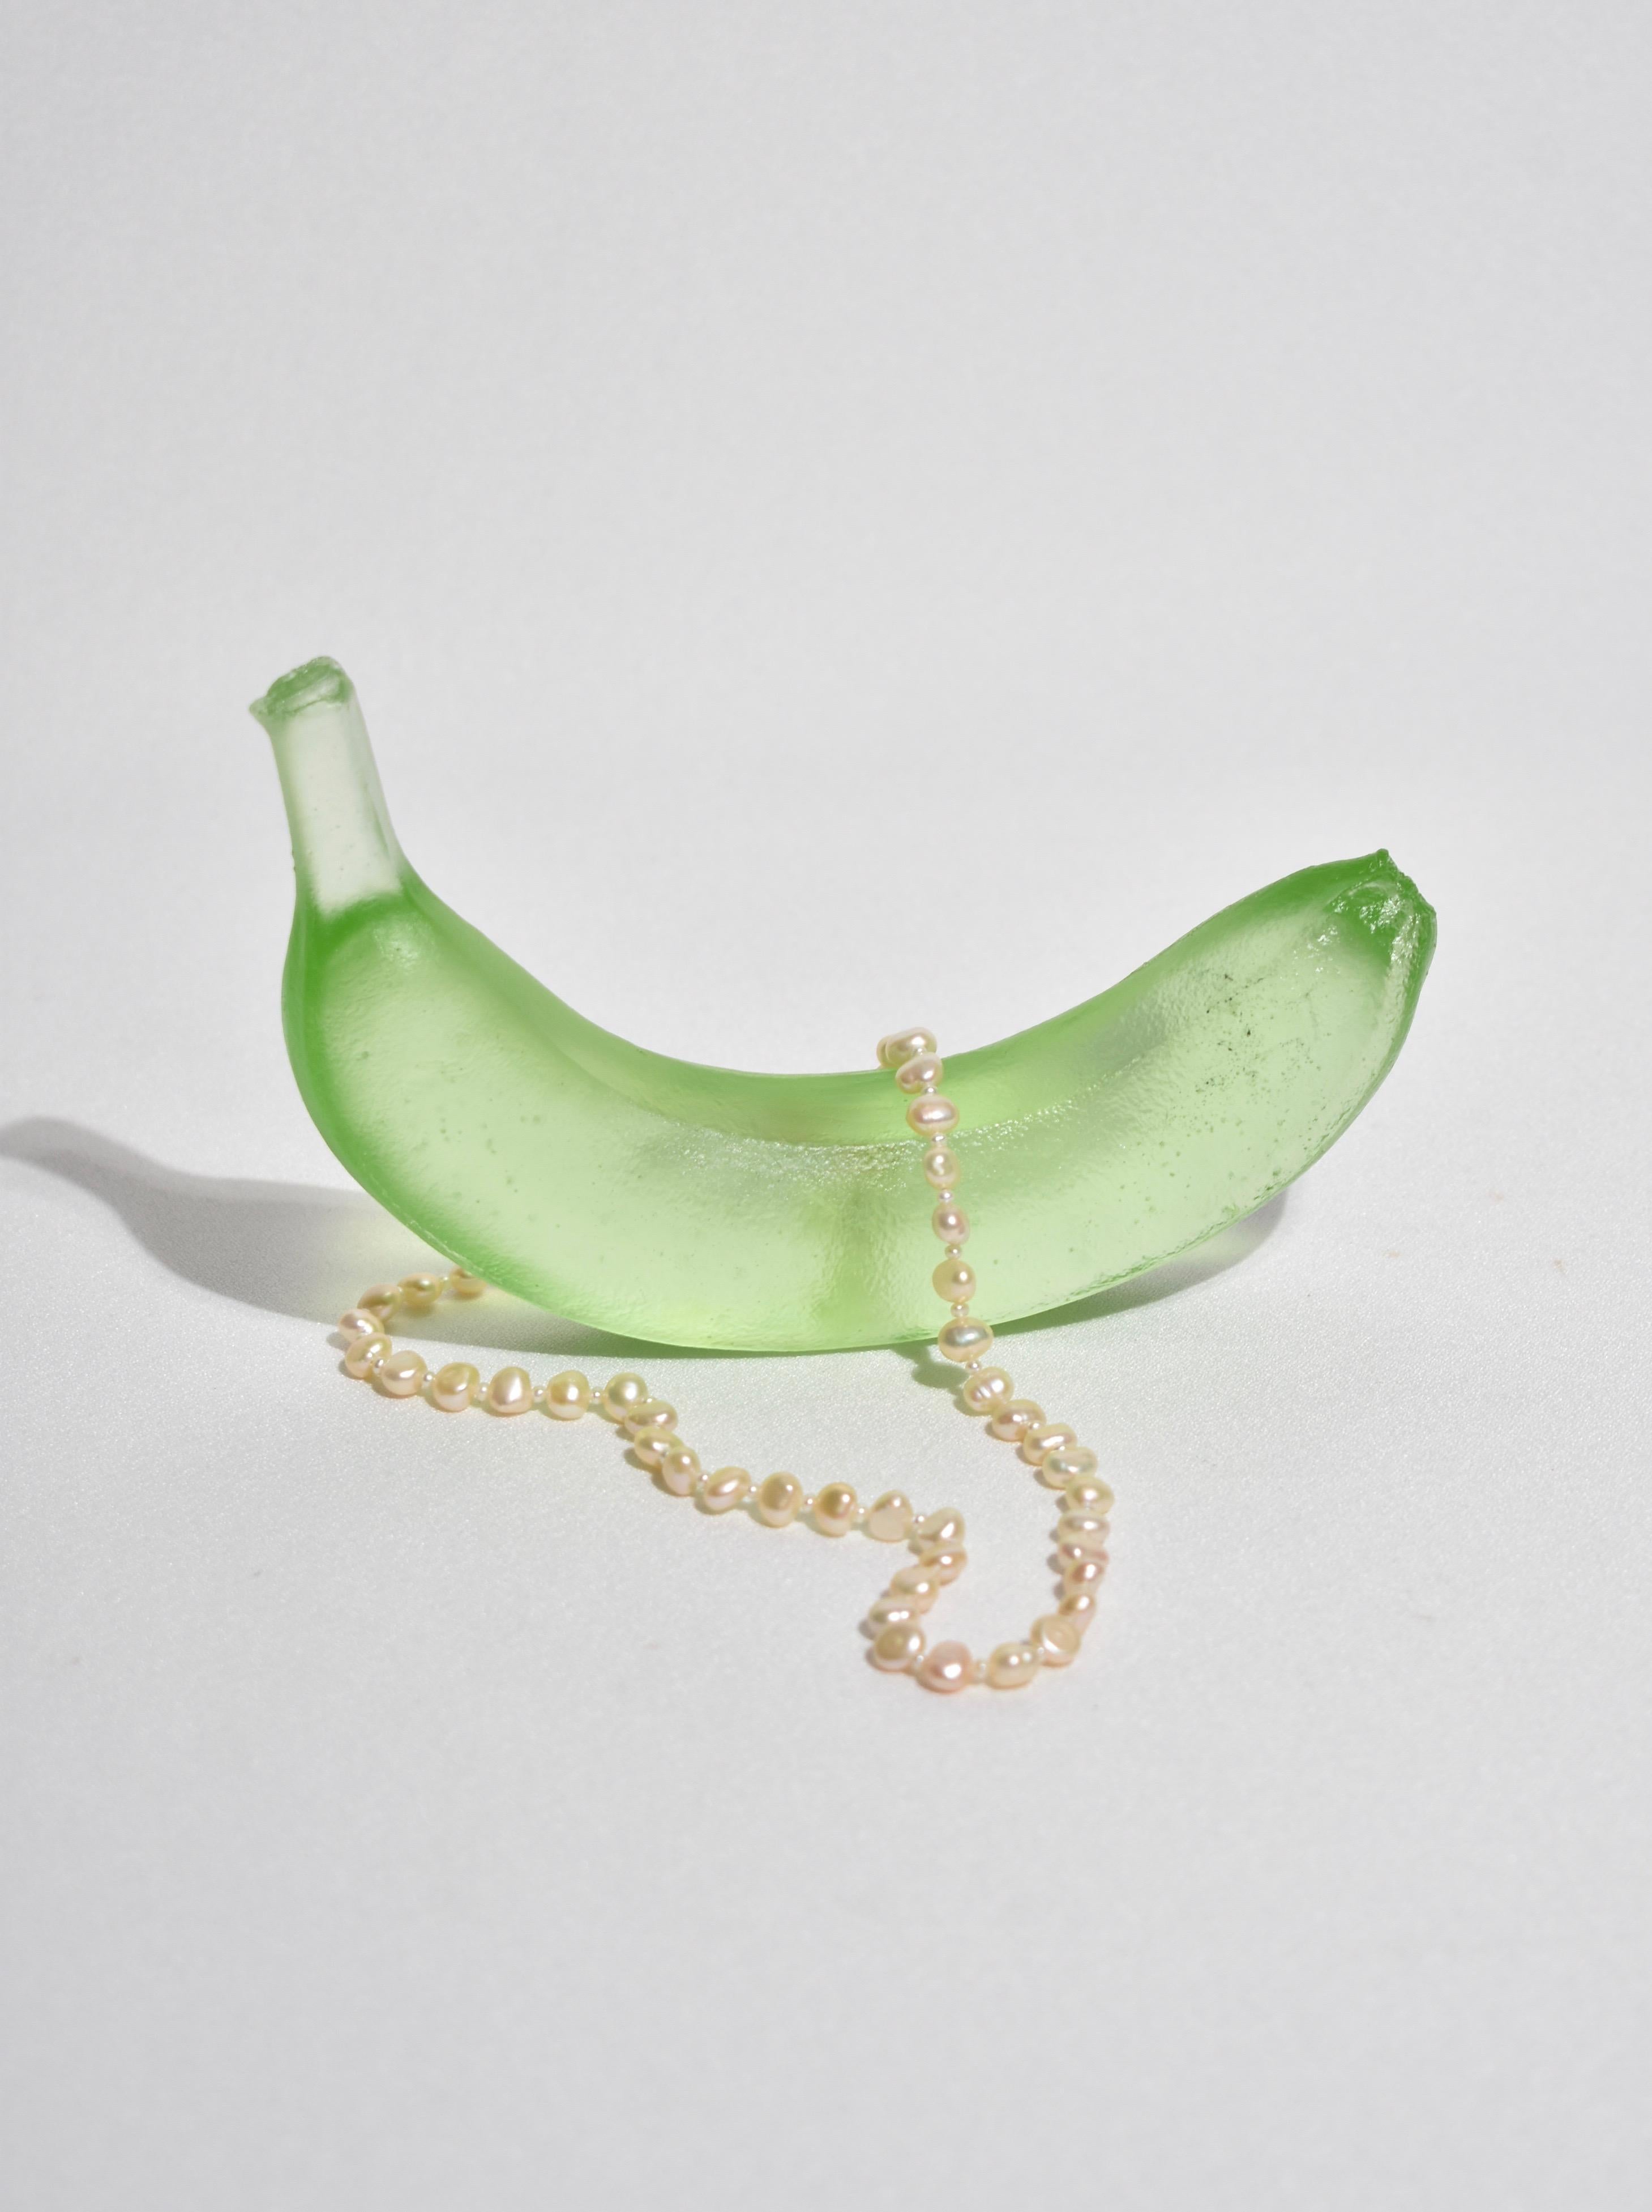 Casted glass banana in lime by Devon Made inspired by blown glass fruit makers and collectors from the 1960's. The light playful approach to everyday fruit is contrasted with the heaviness of the crystal glass, a unique material that catches and